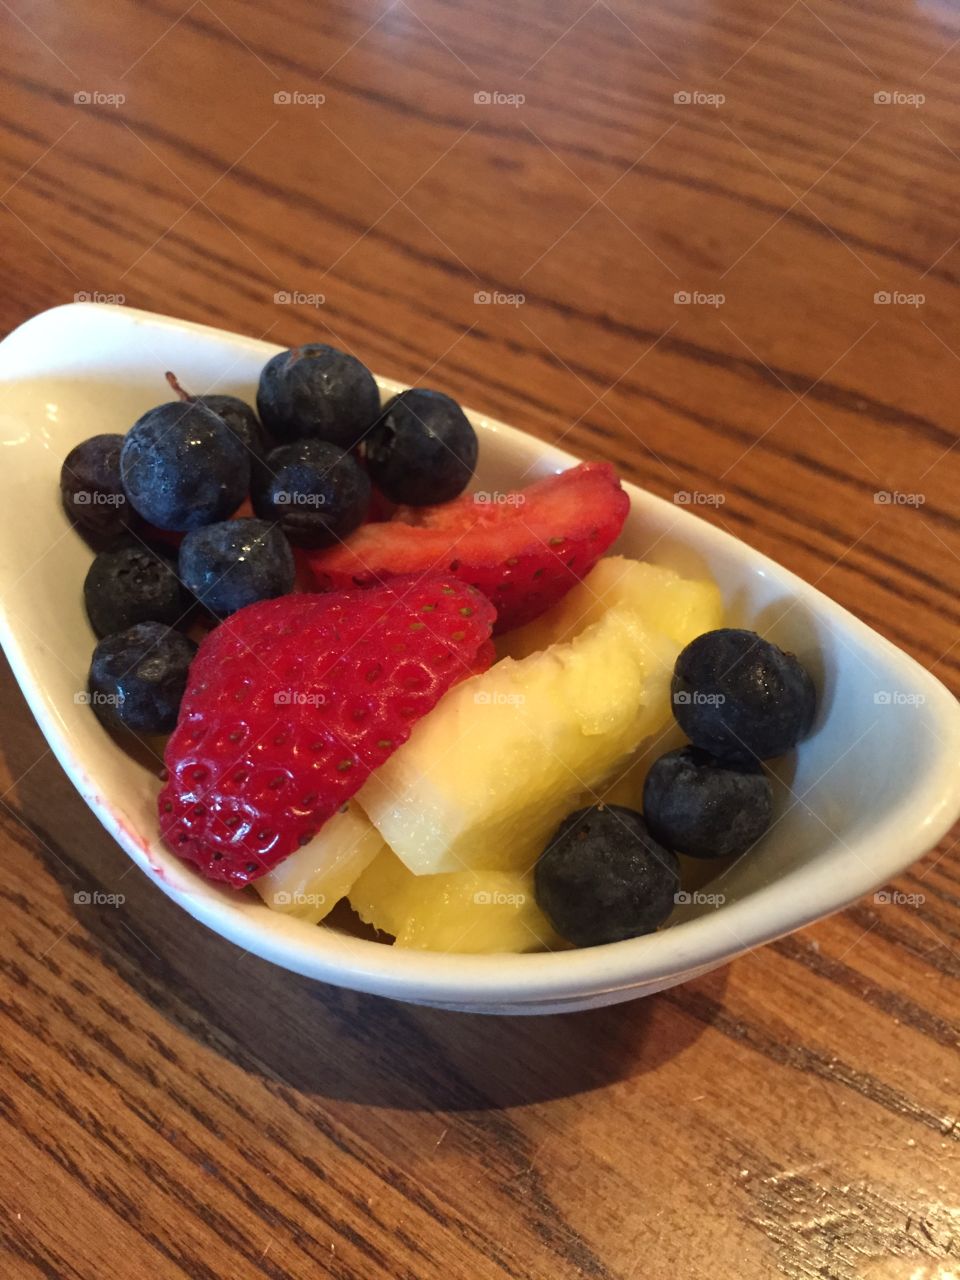 Fruit boat. Trying to eat healthy while on a road trip :)